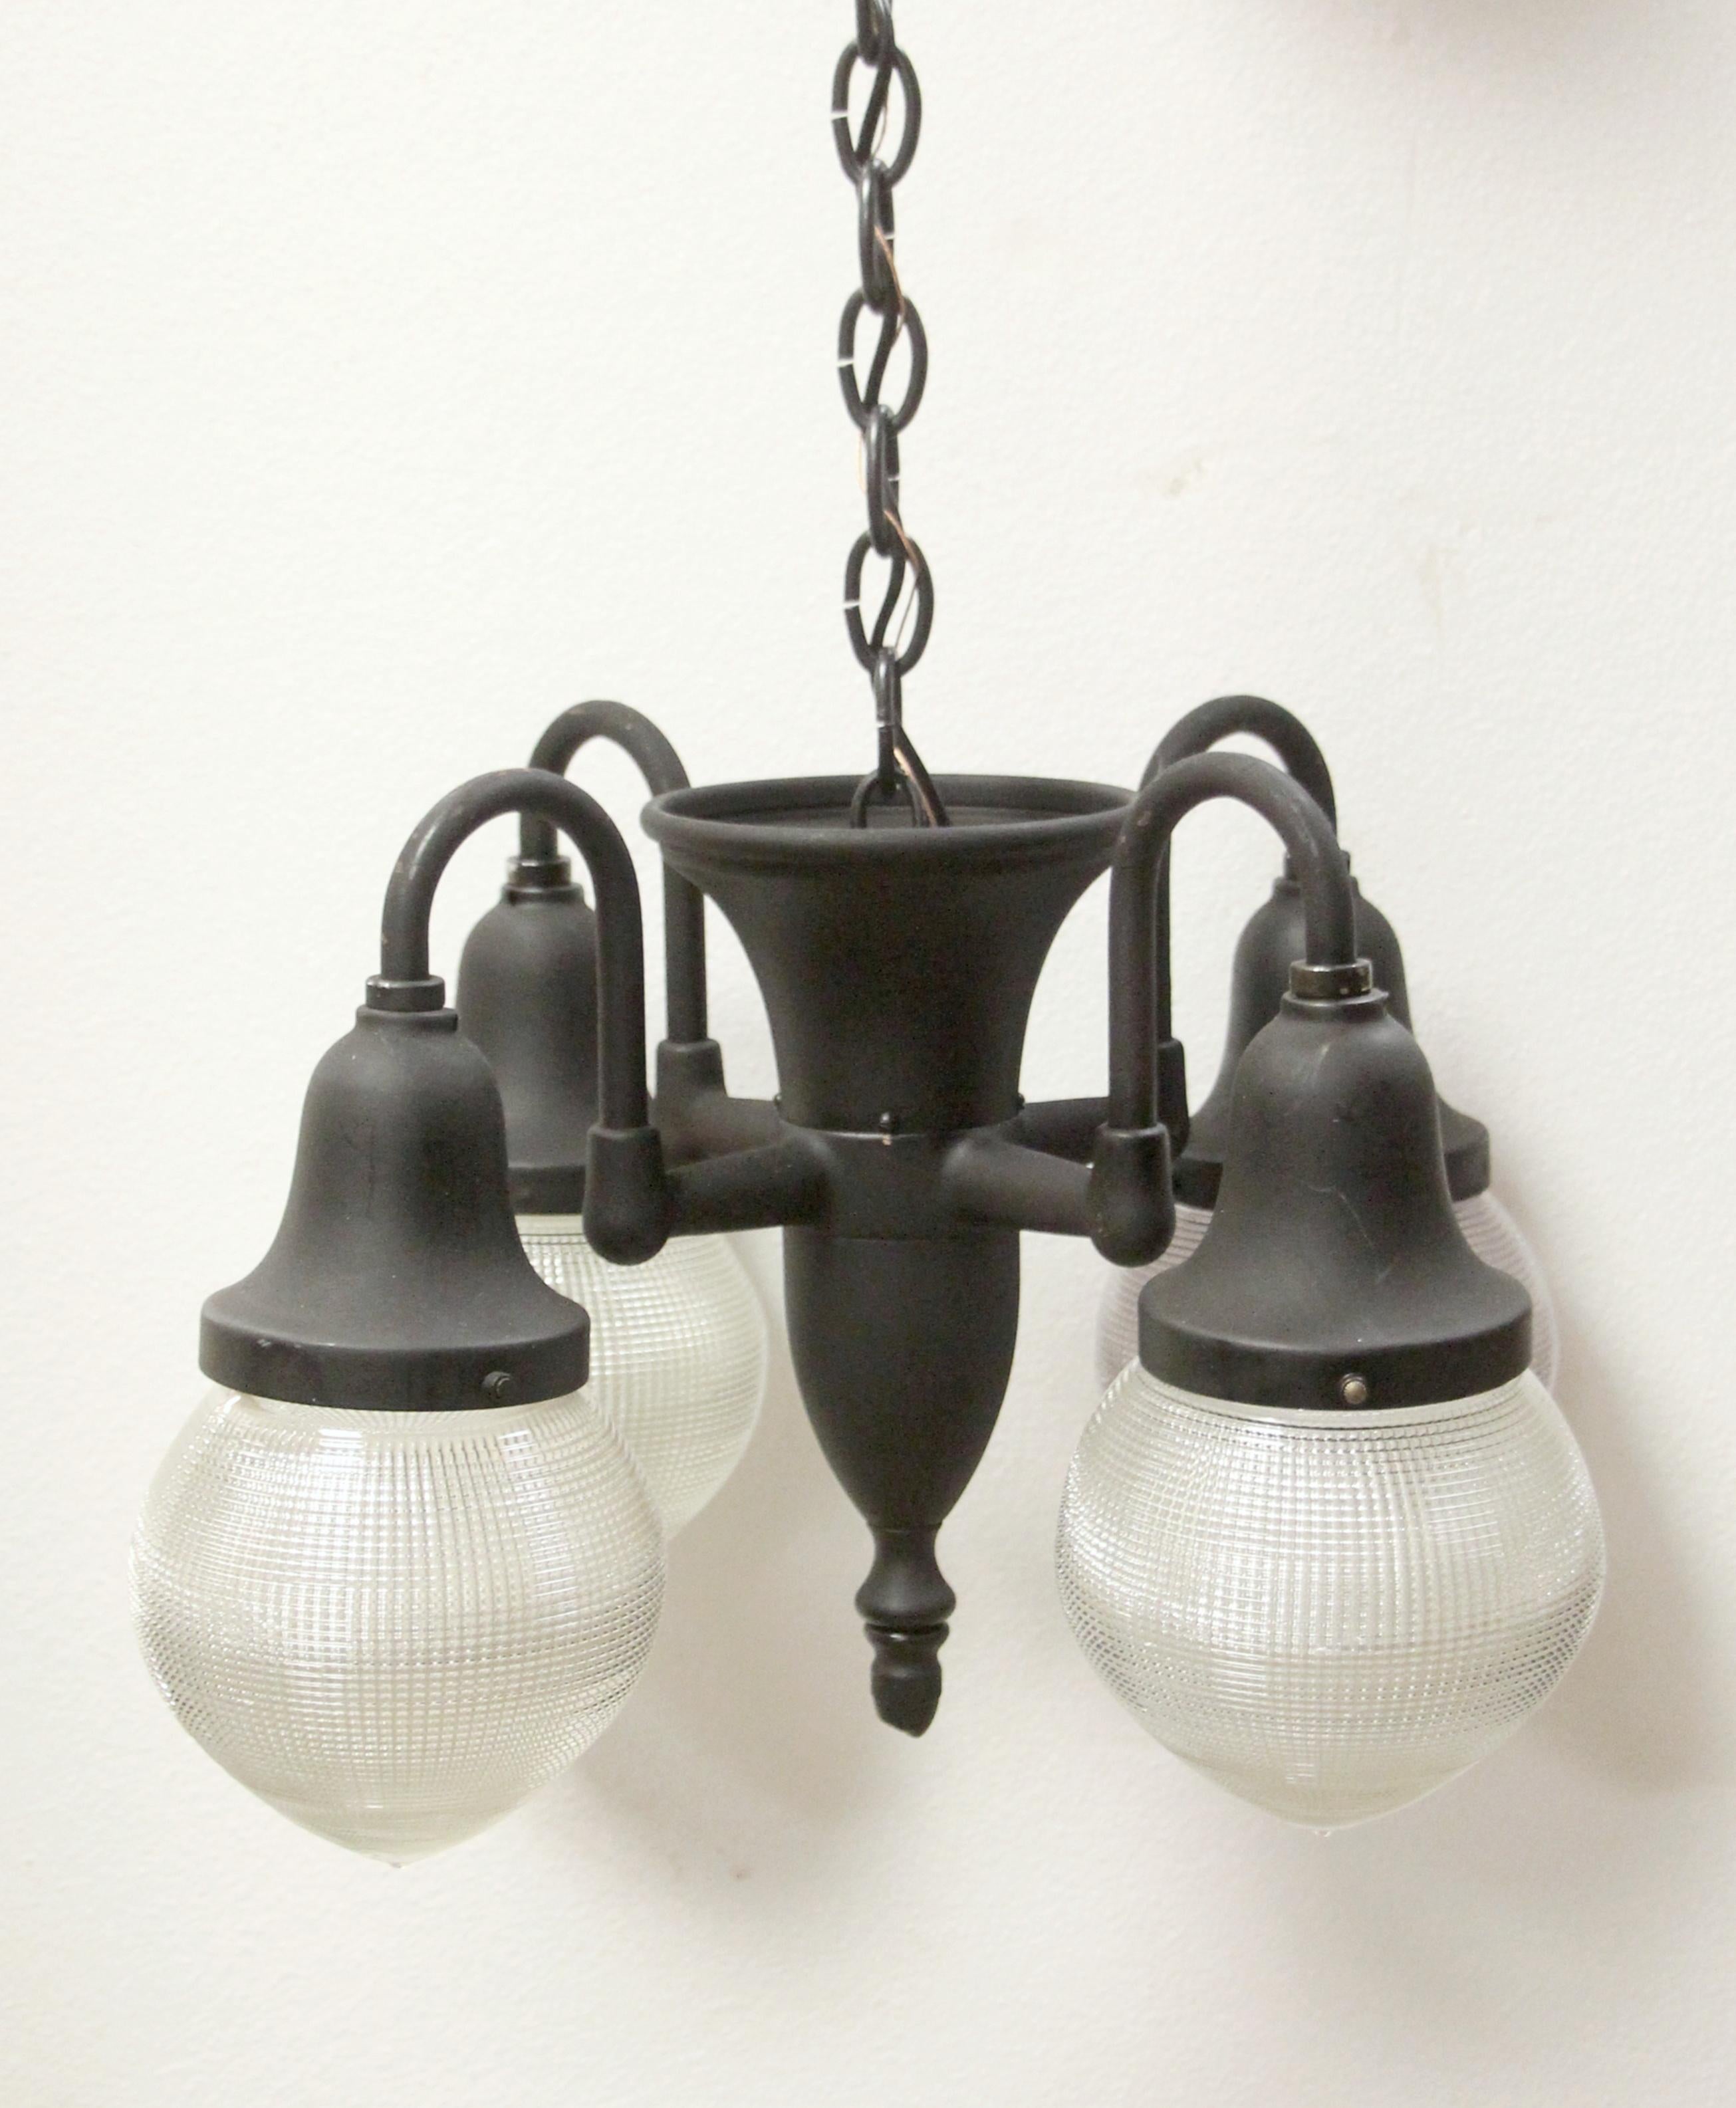 Original 1915 brass dental or Industrial pendant light with a black finish and the four original Holophane down light shades. This has been fully restored with a long brass chain and canopy. This can be seen at our 302 Bowery location in NoHo in